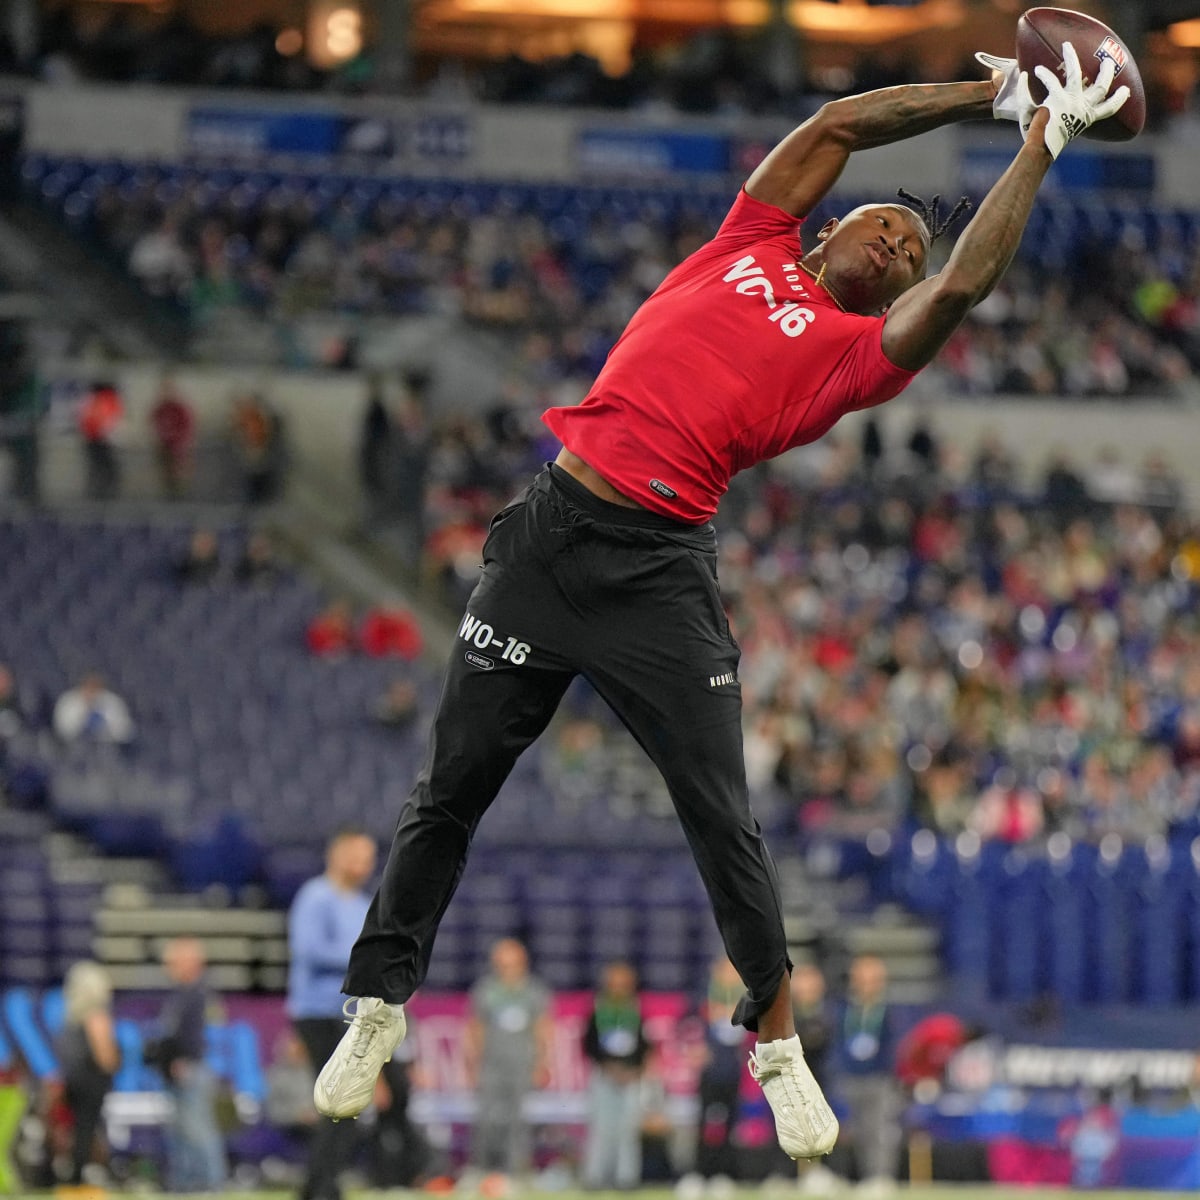 Ravens 2023 NFL Draft: Why the Ravens picked Zay Flowers, wide receiver  from Boston College - Baltimore Beatdown